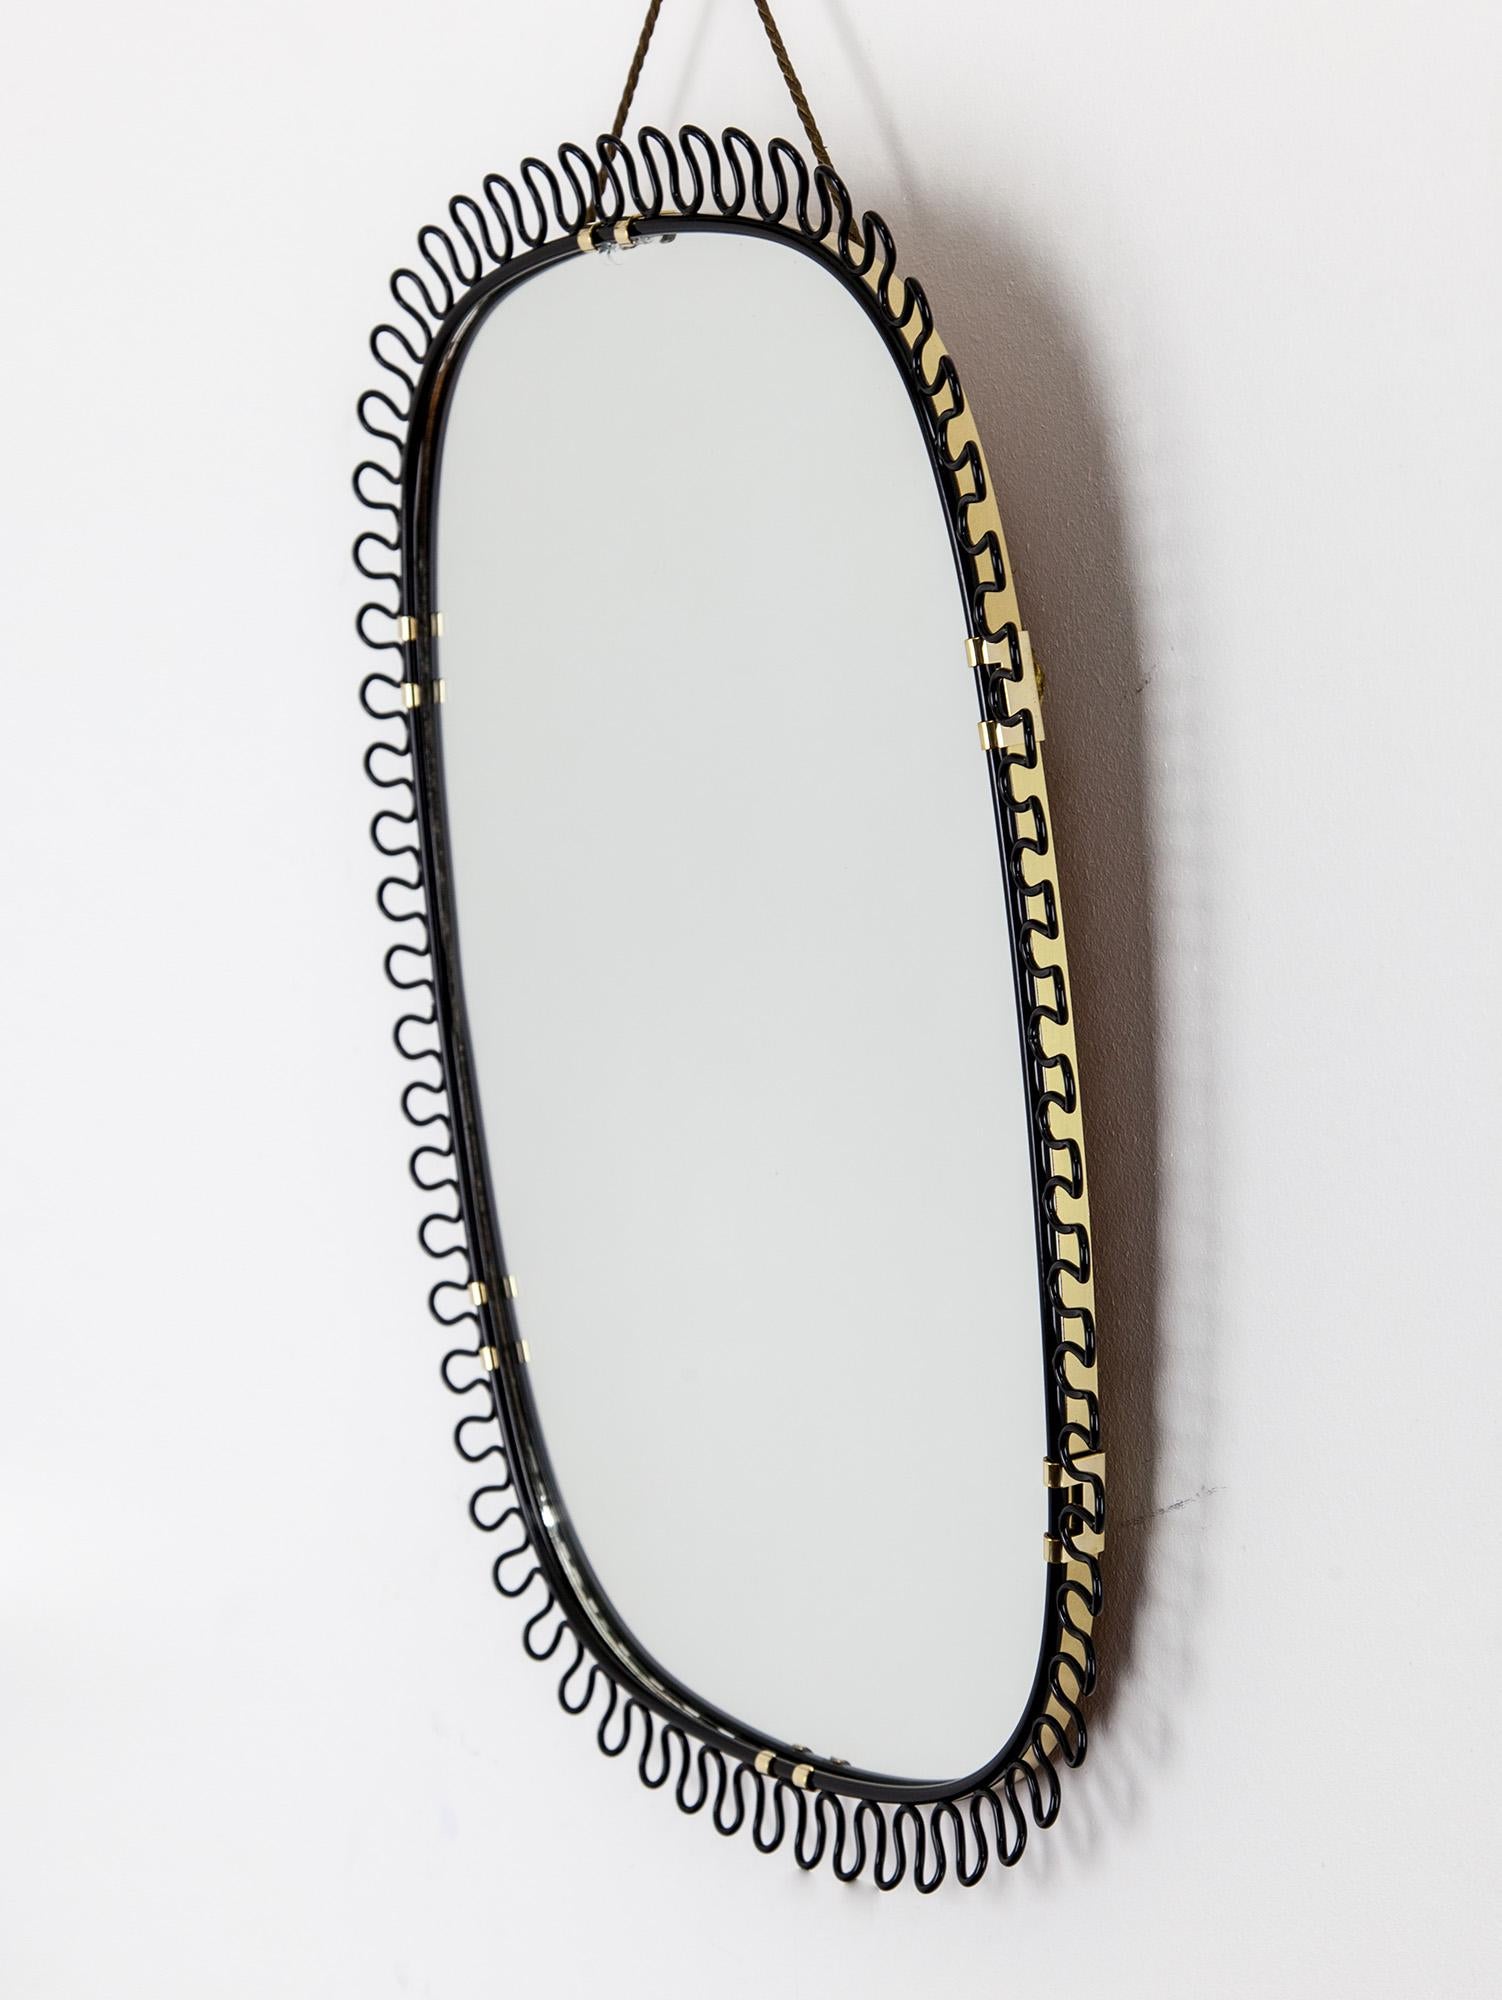 A stunning and rare sculptural black loop mirror by Josef Frank for Svenskt Tenn. The lovely continuous loop detail surrounds the mirror and contrasts against the brass frame and brass details. Hung by the original golden cord. Made in Sweden, circa